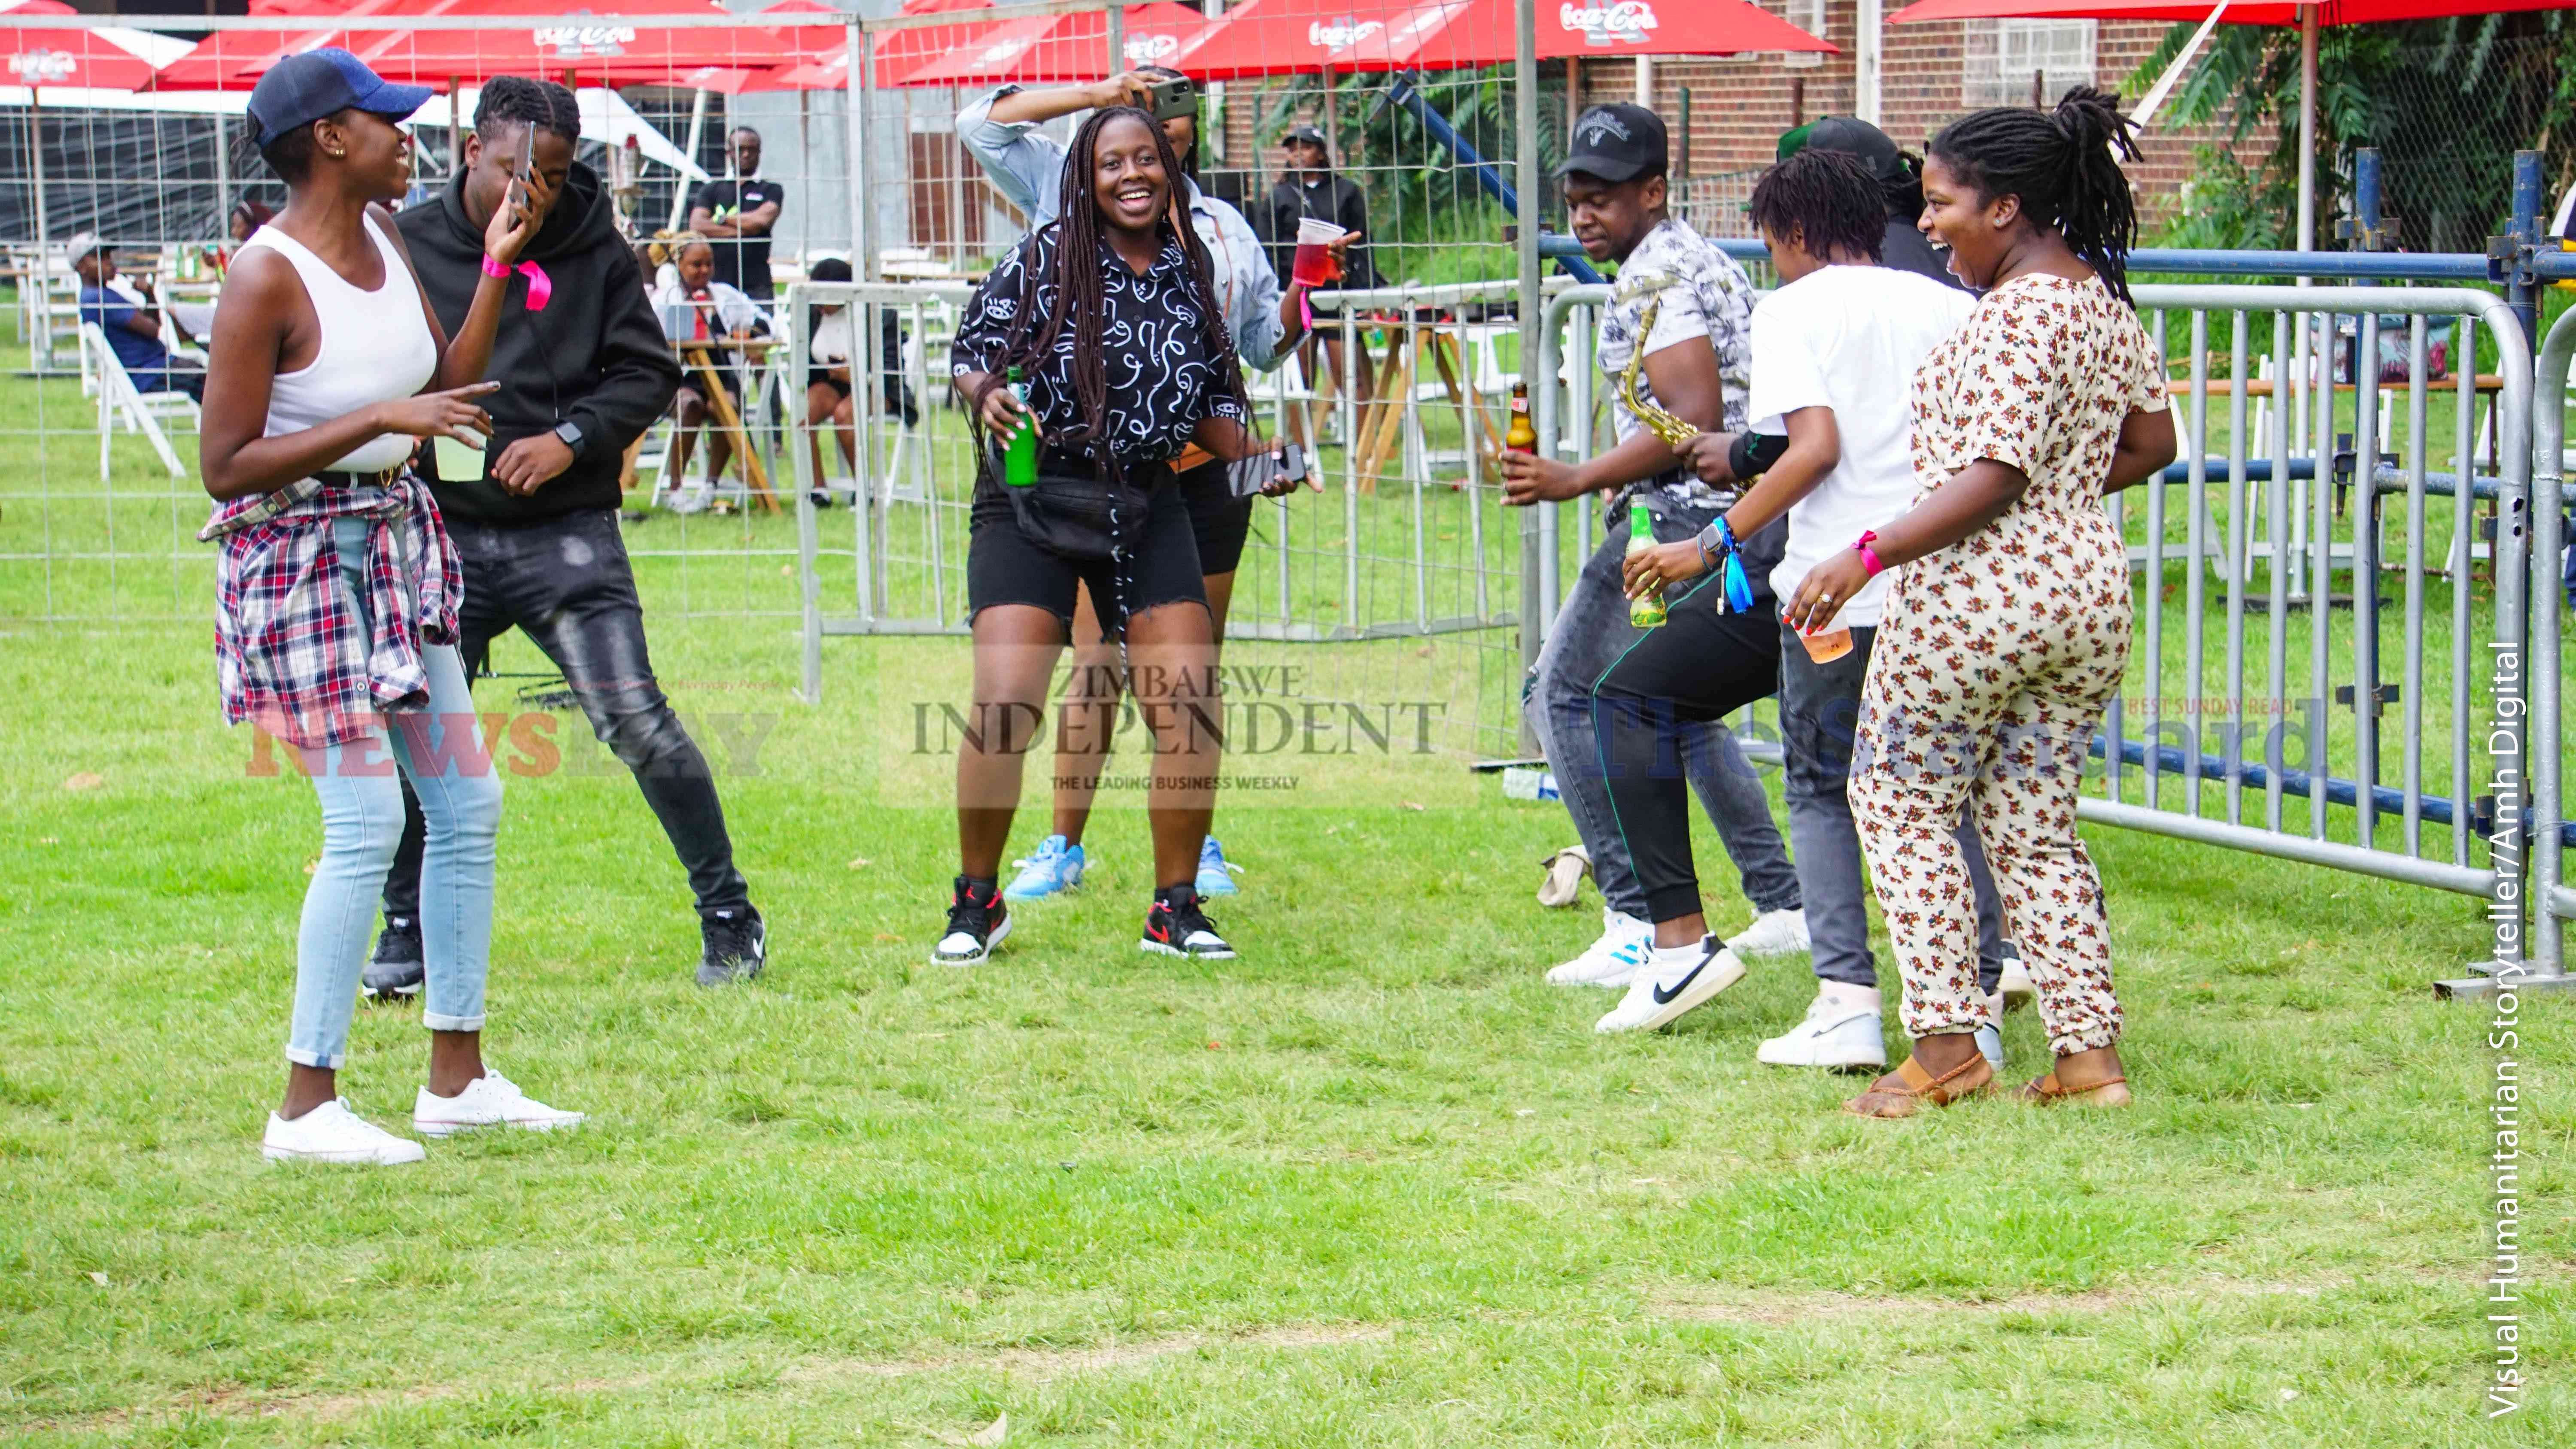 CookOutZW at Alexandra Sports Club in Harare